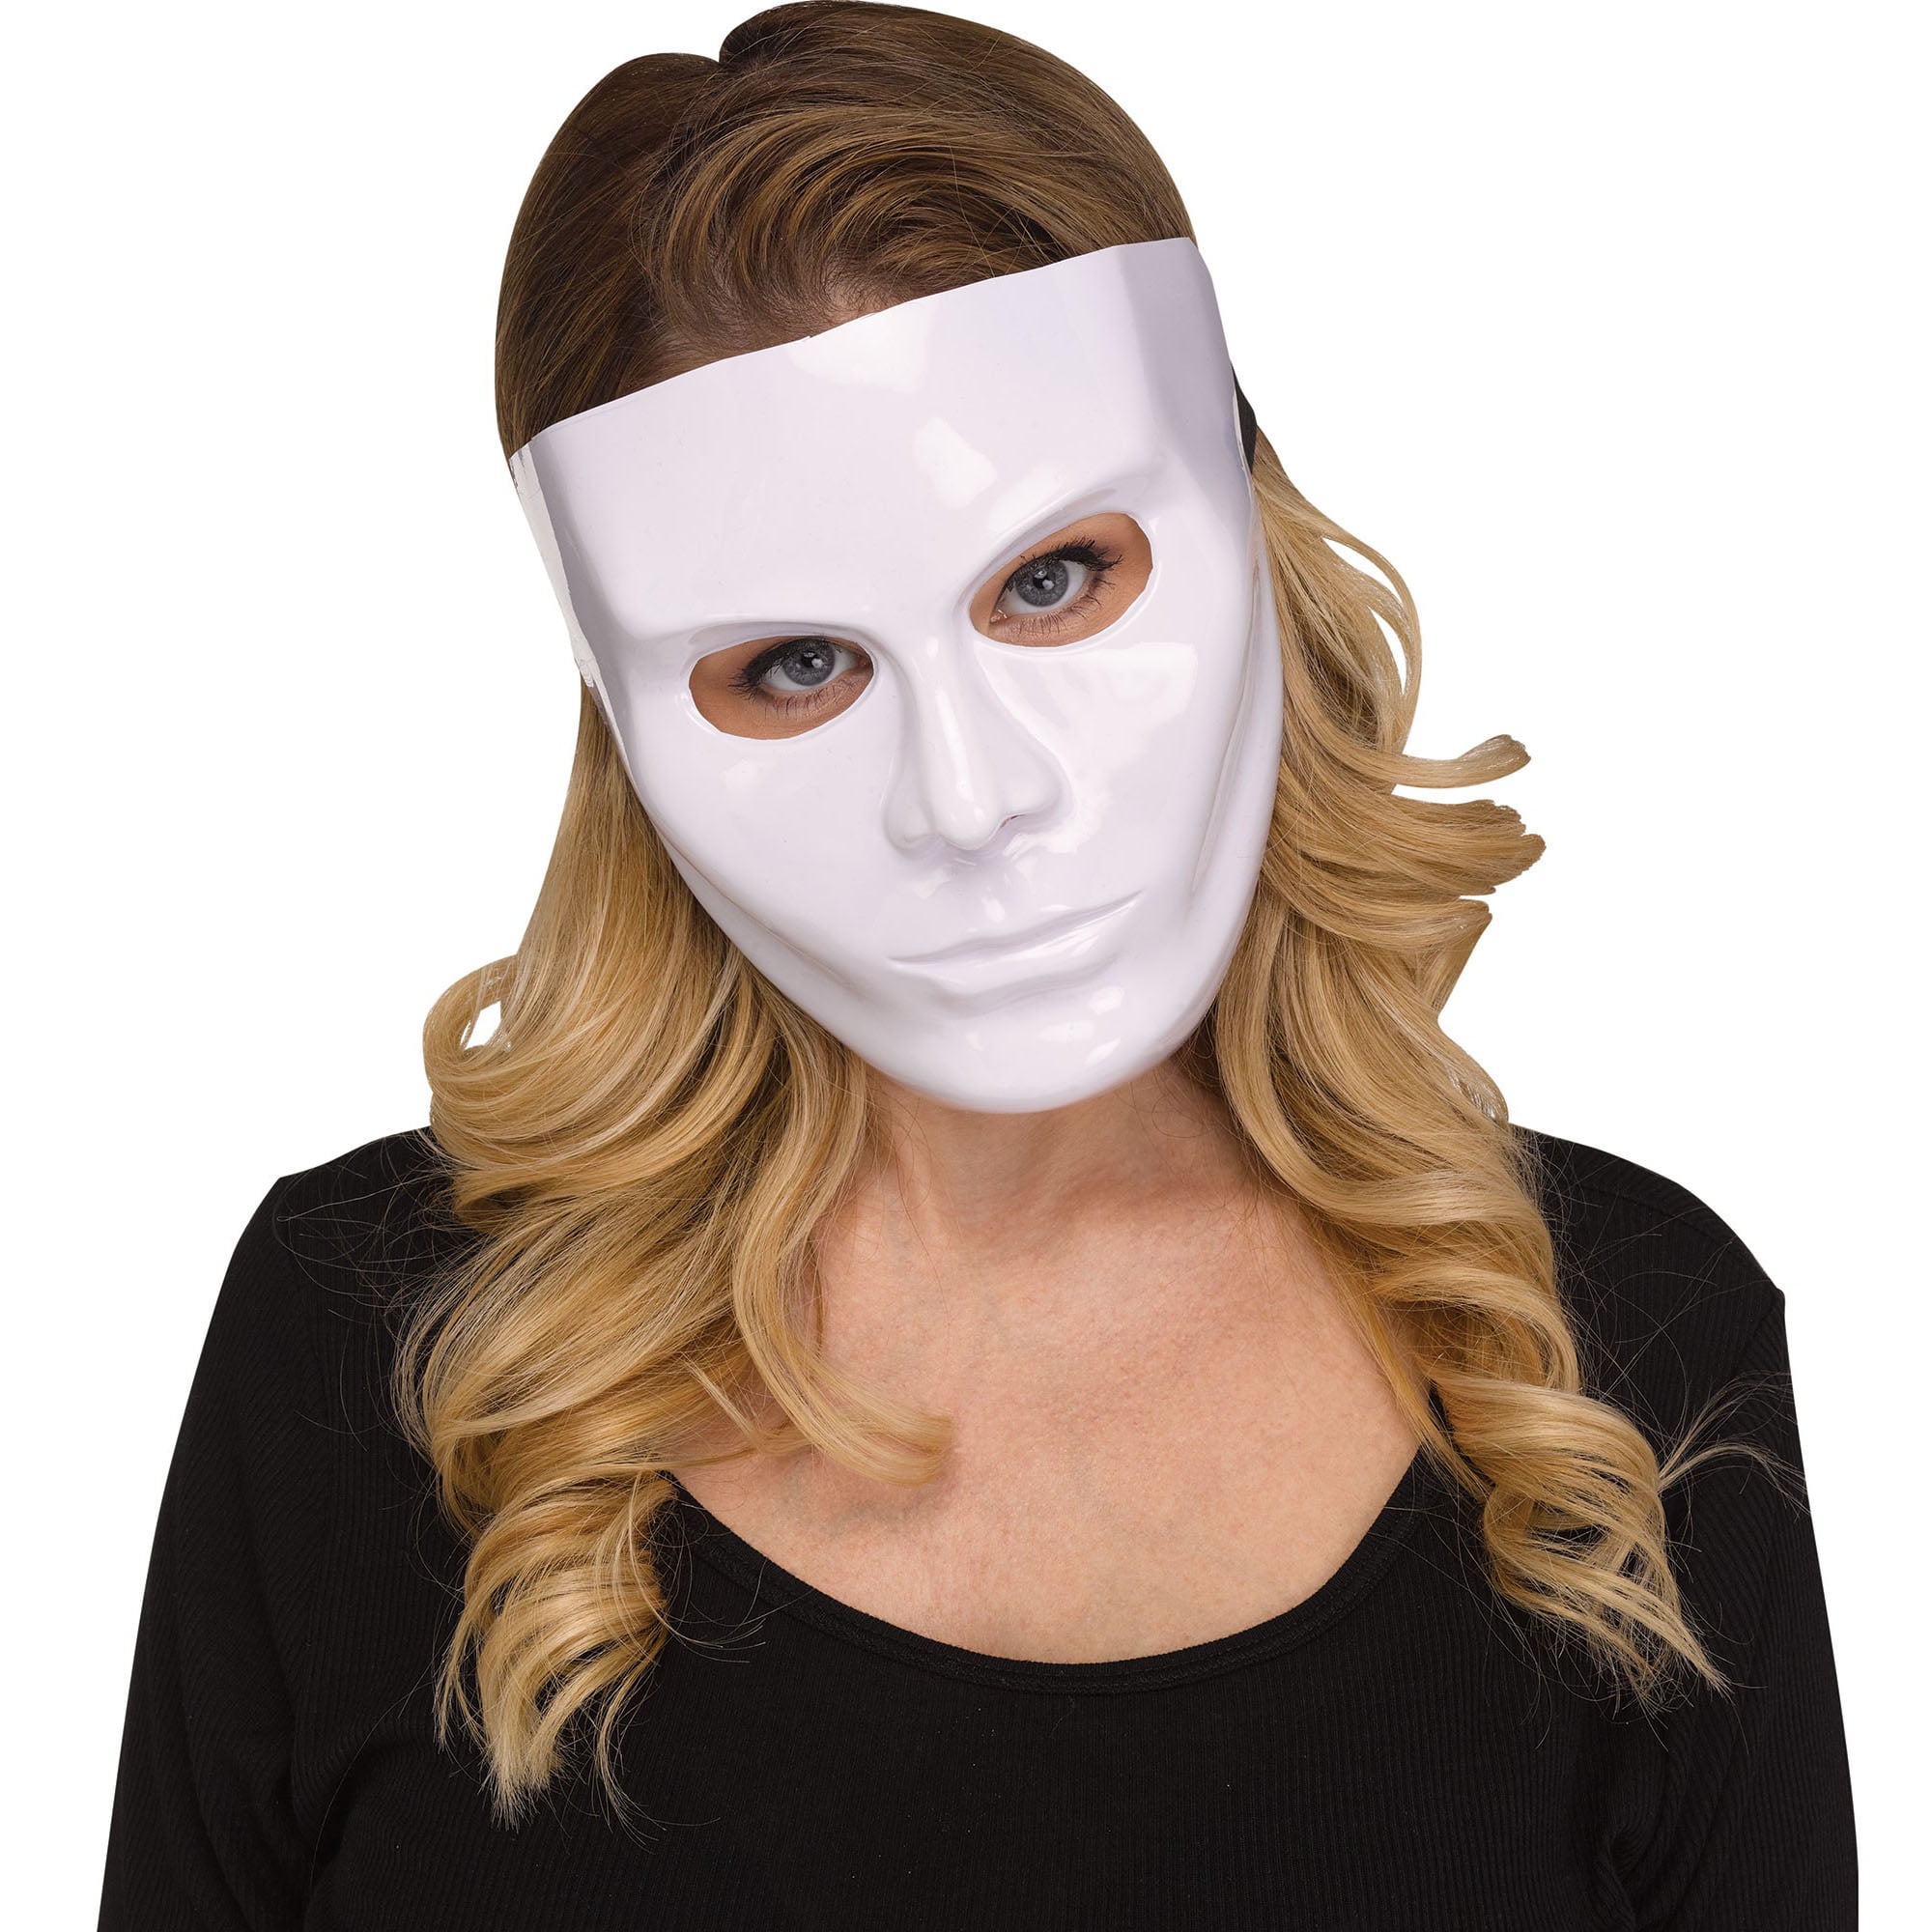 Solid Blank Female Anonymous Halloween Costume Face Mask, White, One